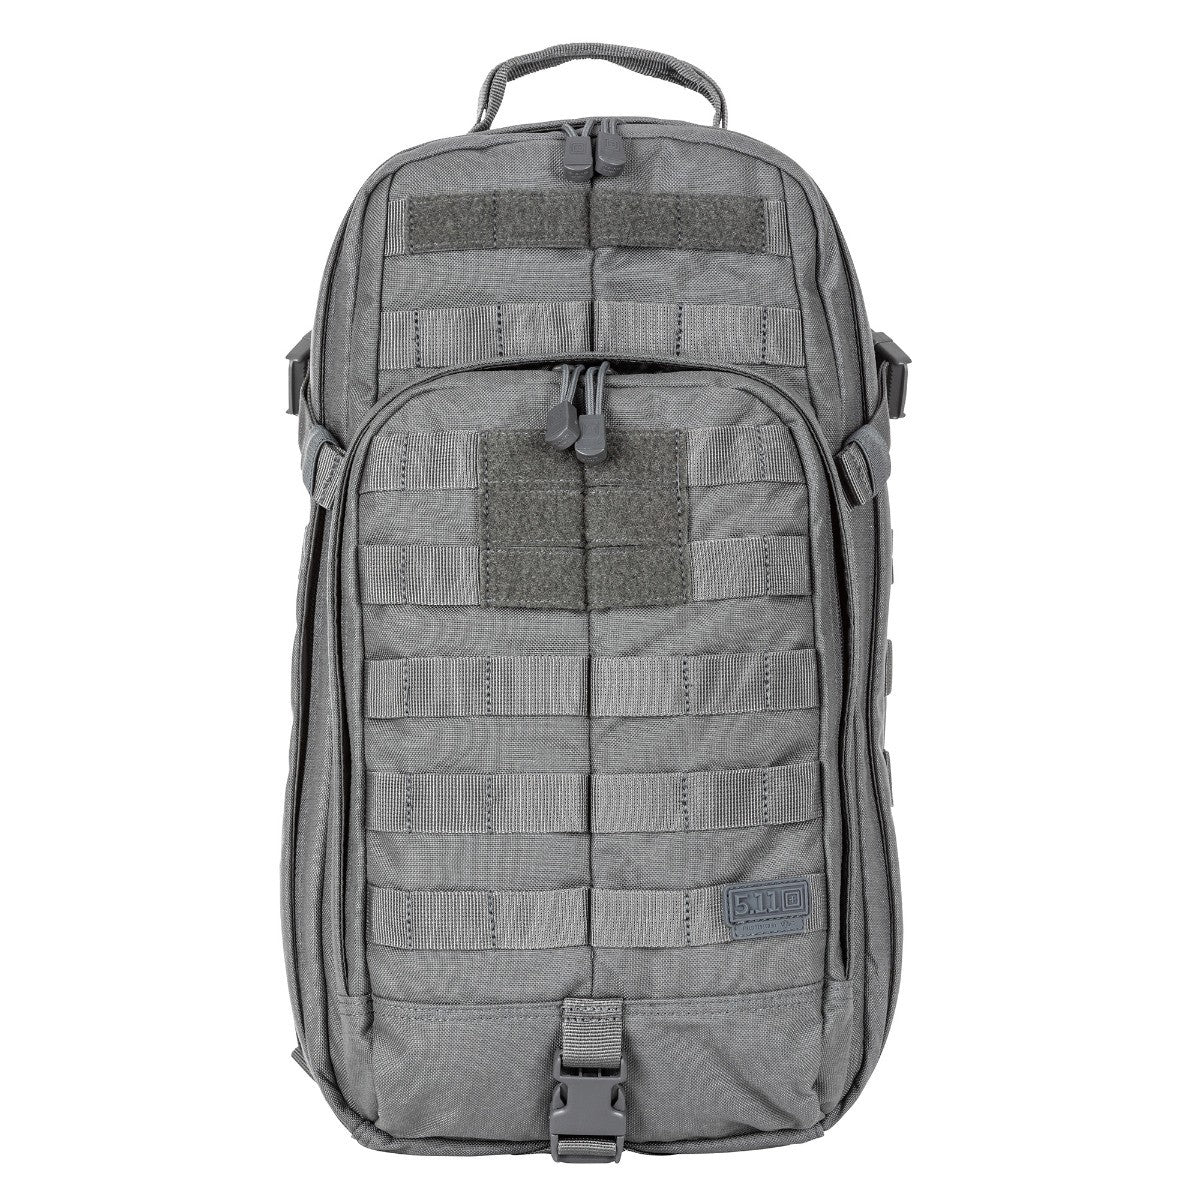 a grey backpack with a small patch on the front